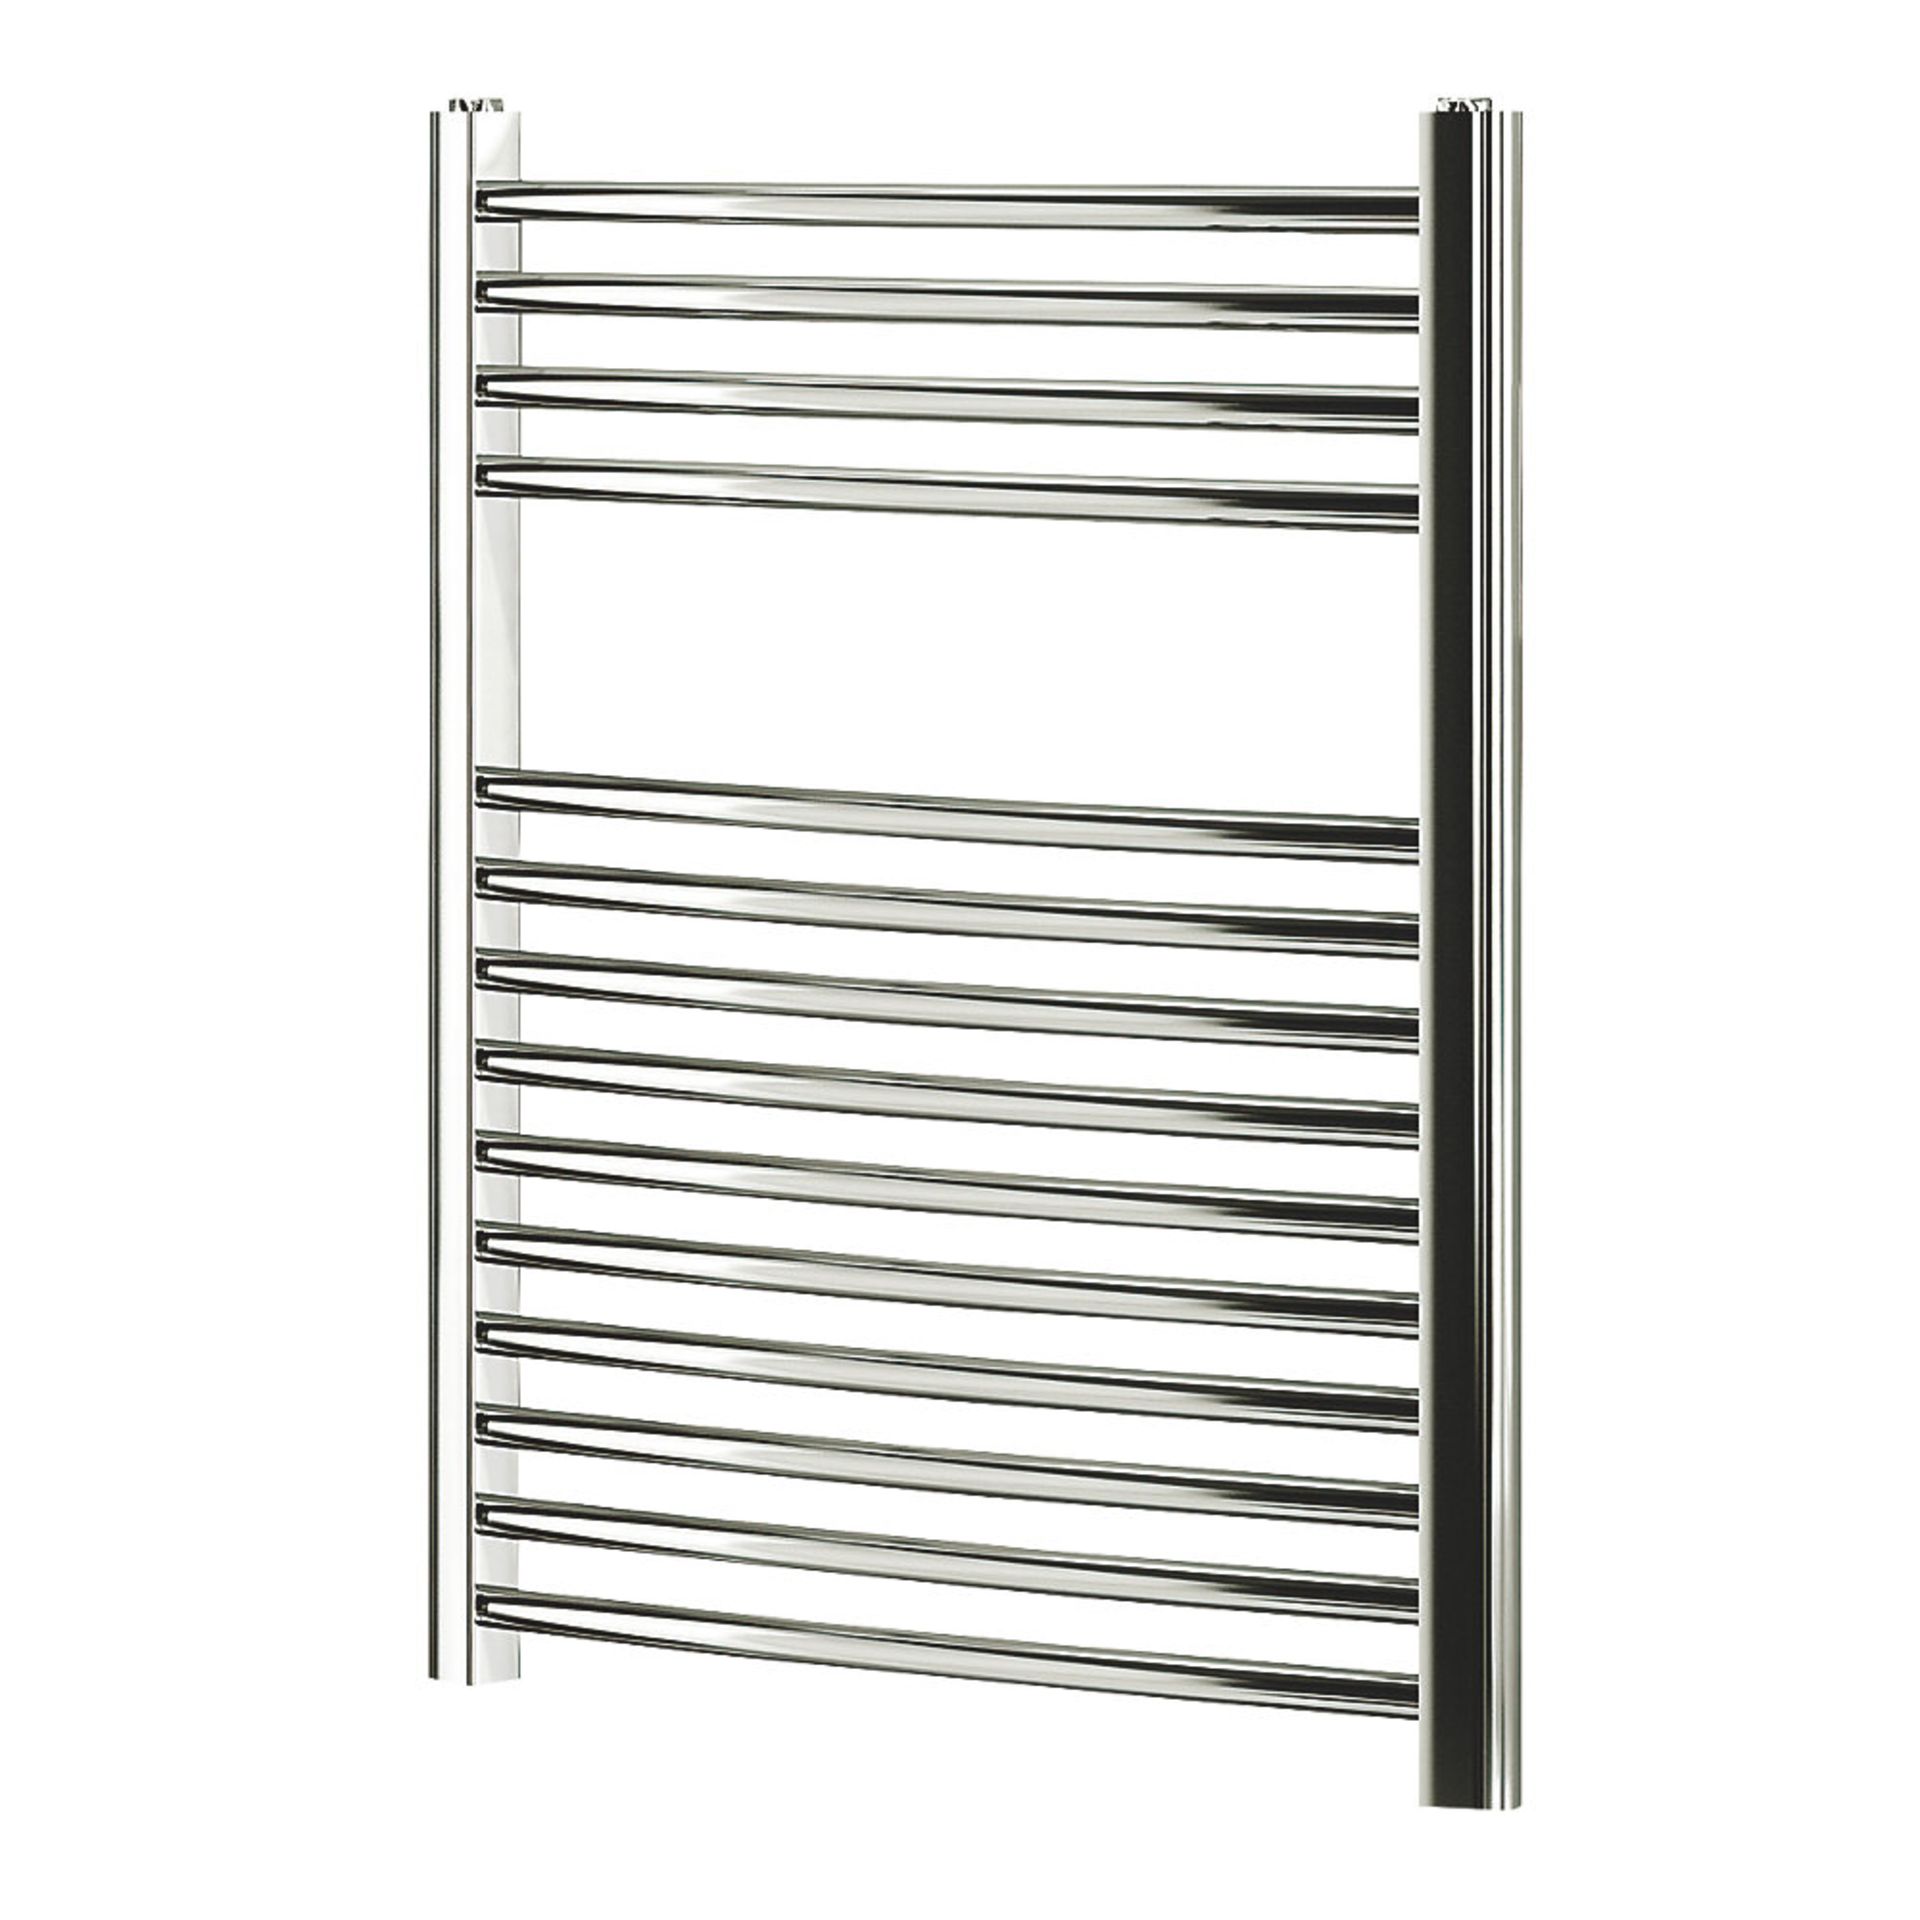 (EY156) 700x600mm Curved Chrome Towel Radiator. High quality chrome-plated steel construction. - Image 2 of 2